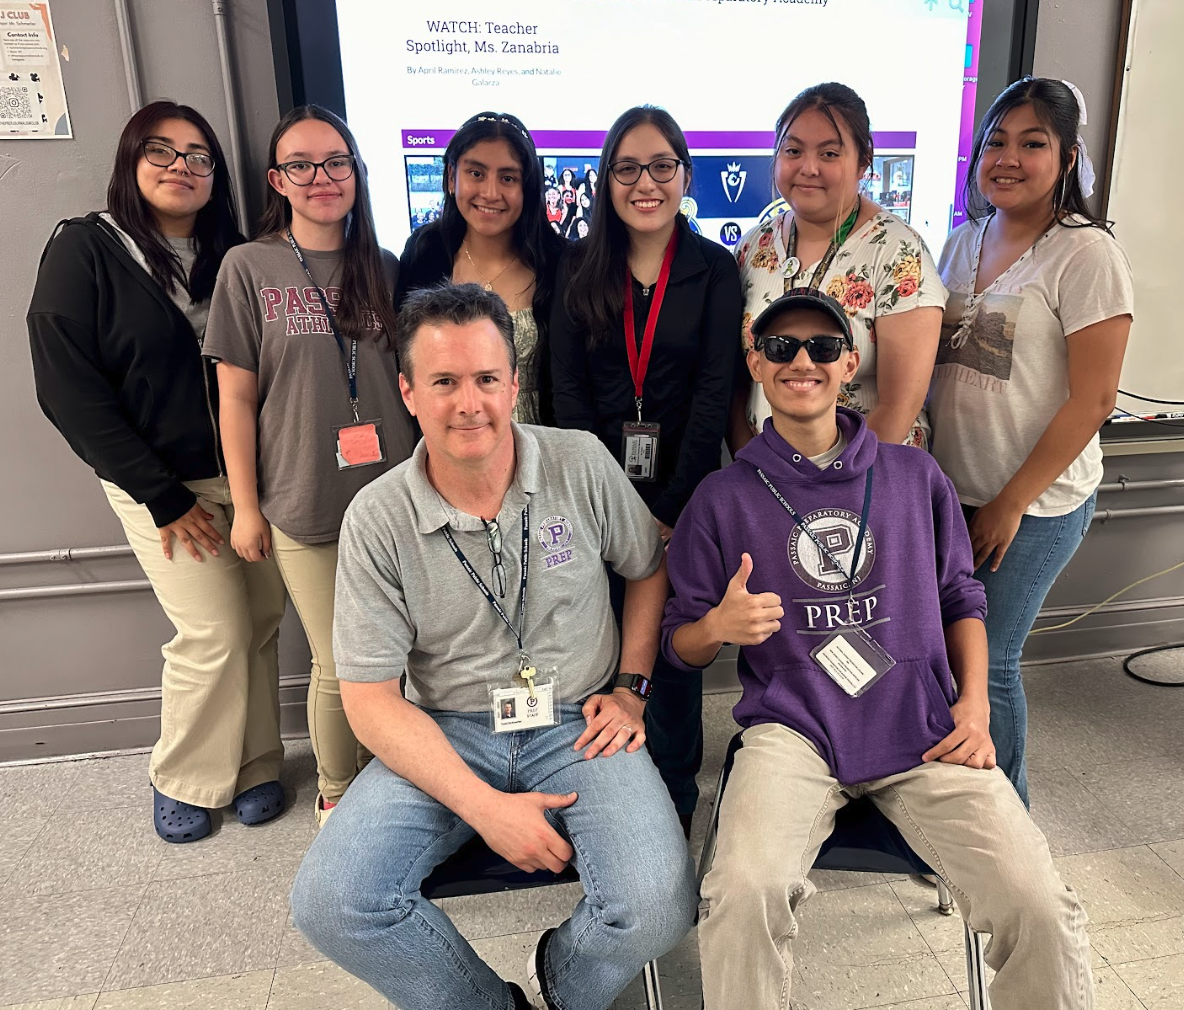 The Editorial Staff for The Boulevard Online, 2024-25, left to right: Destiny Lopez, Features Editor; Natalie Galarza, Features Editor; Stephanie Bautista, Photo/Video Editor; Francesca Penaloza, News Editor; Yadira Gonzalez, News Editor; Angelie Aguilar, Graphics Editor. Seated, left to right: Mr. Schmerler, Staff Advisor; Julian Carrera, Editor-In-Chief.